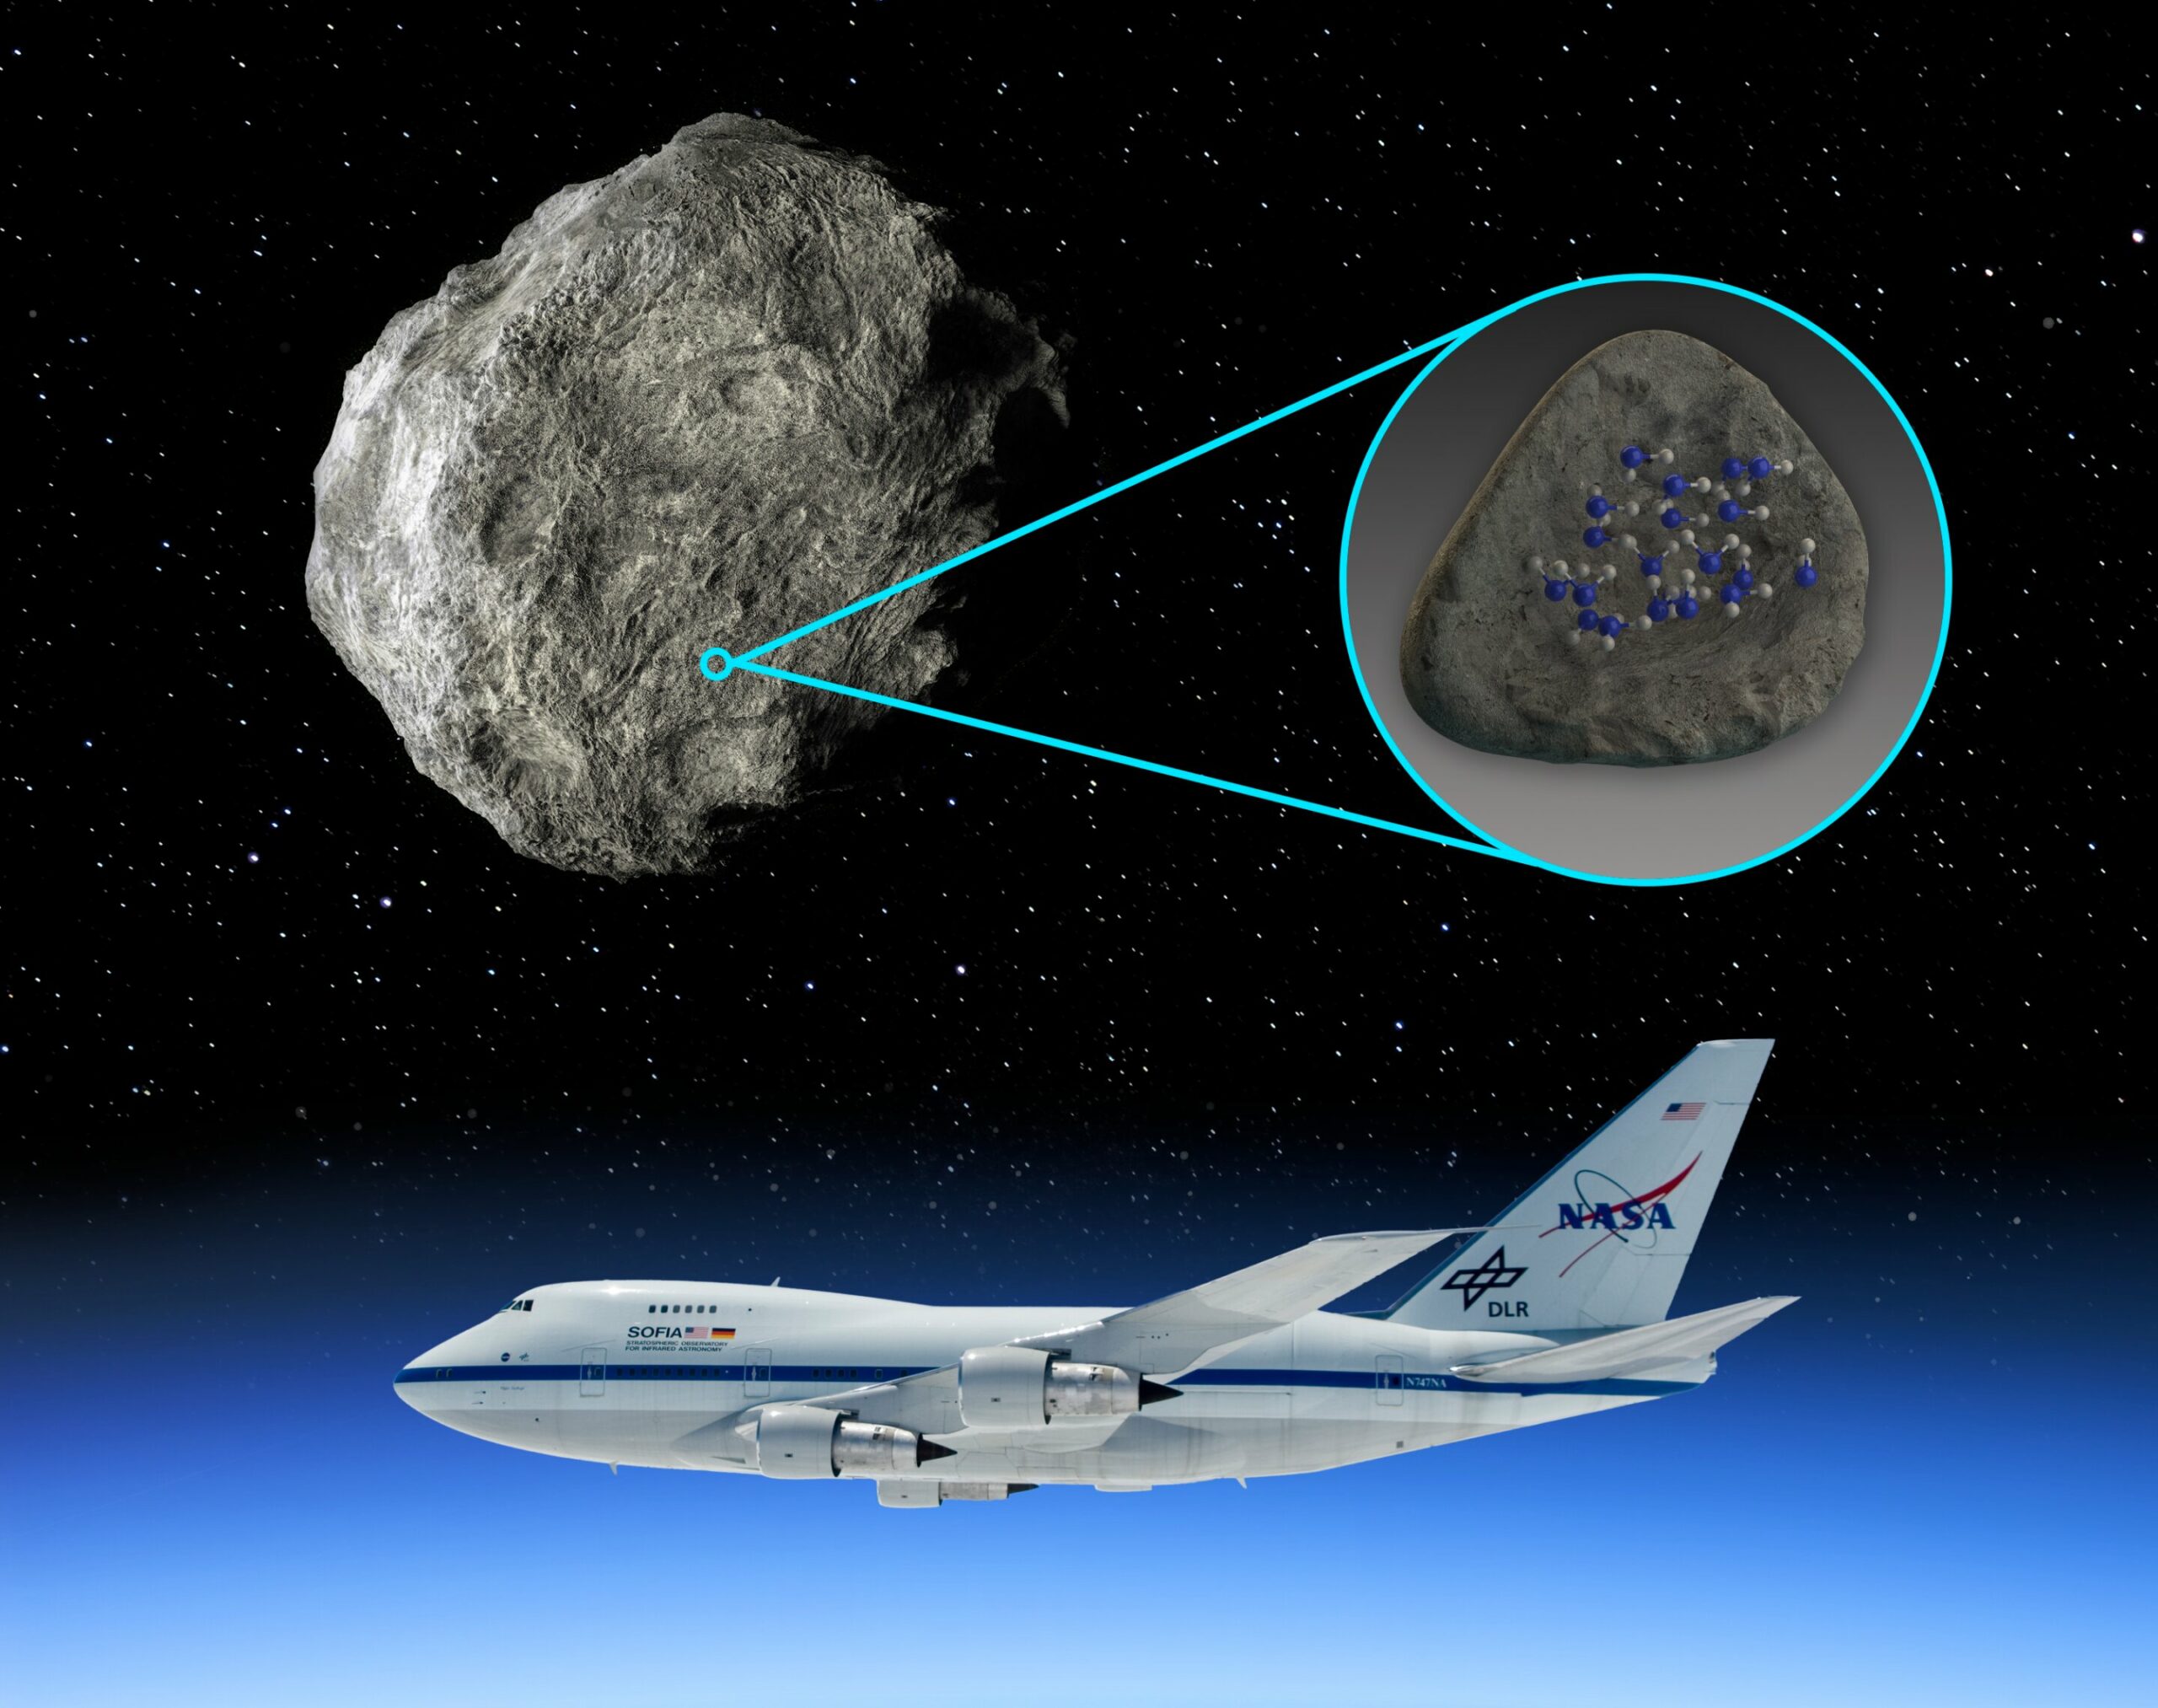 Water molecules have been detected on asteroids by scientists for the very first time.